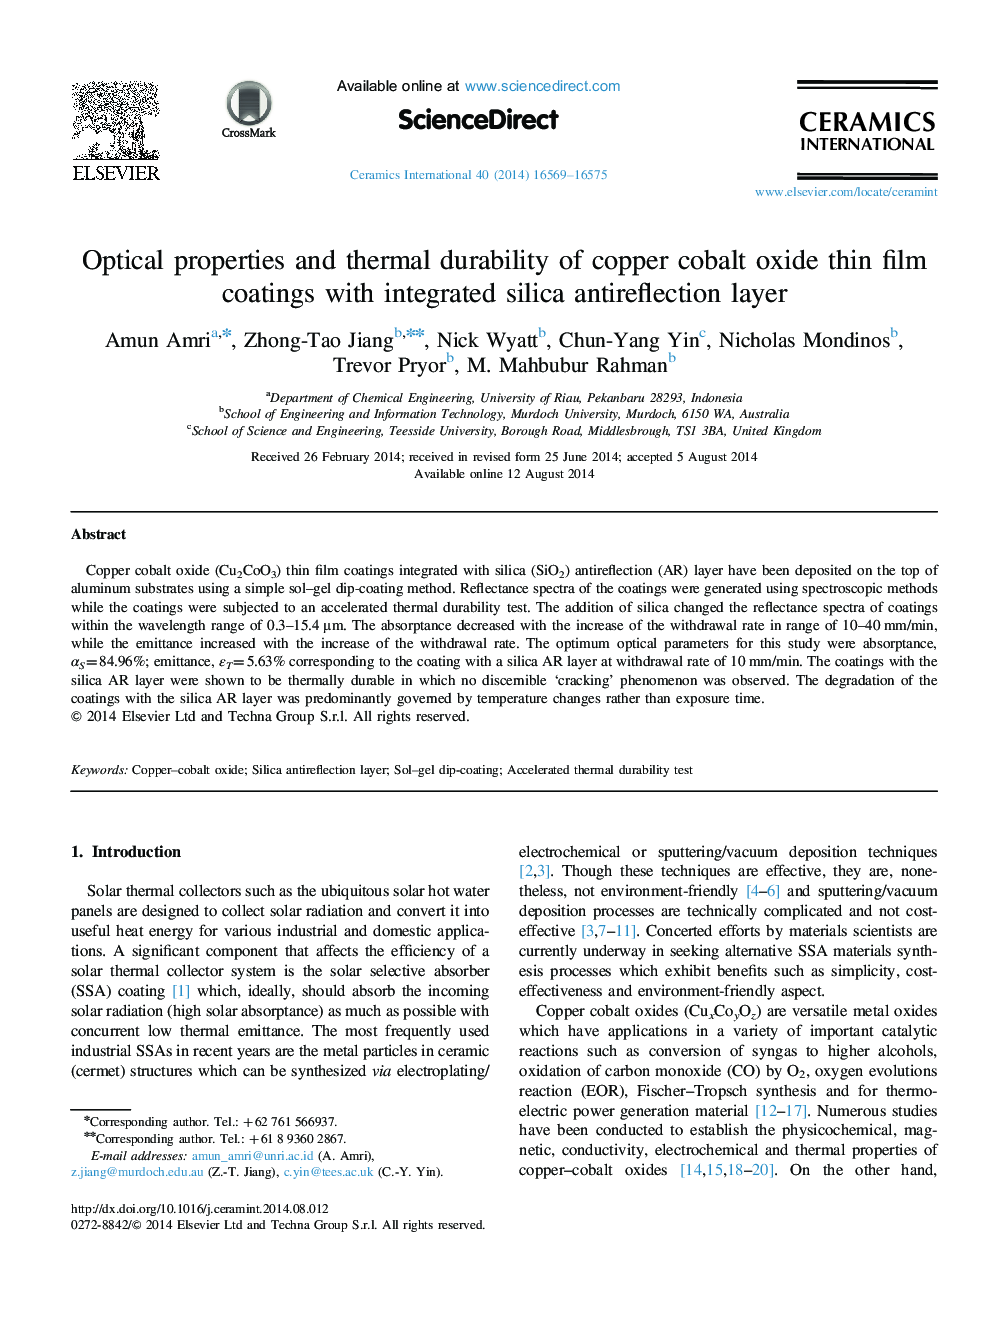 Optical properties and thermal durability of copper cobalt oxide thin film coatings with integrated silica antireflection layer